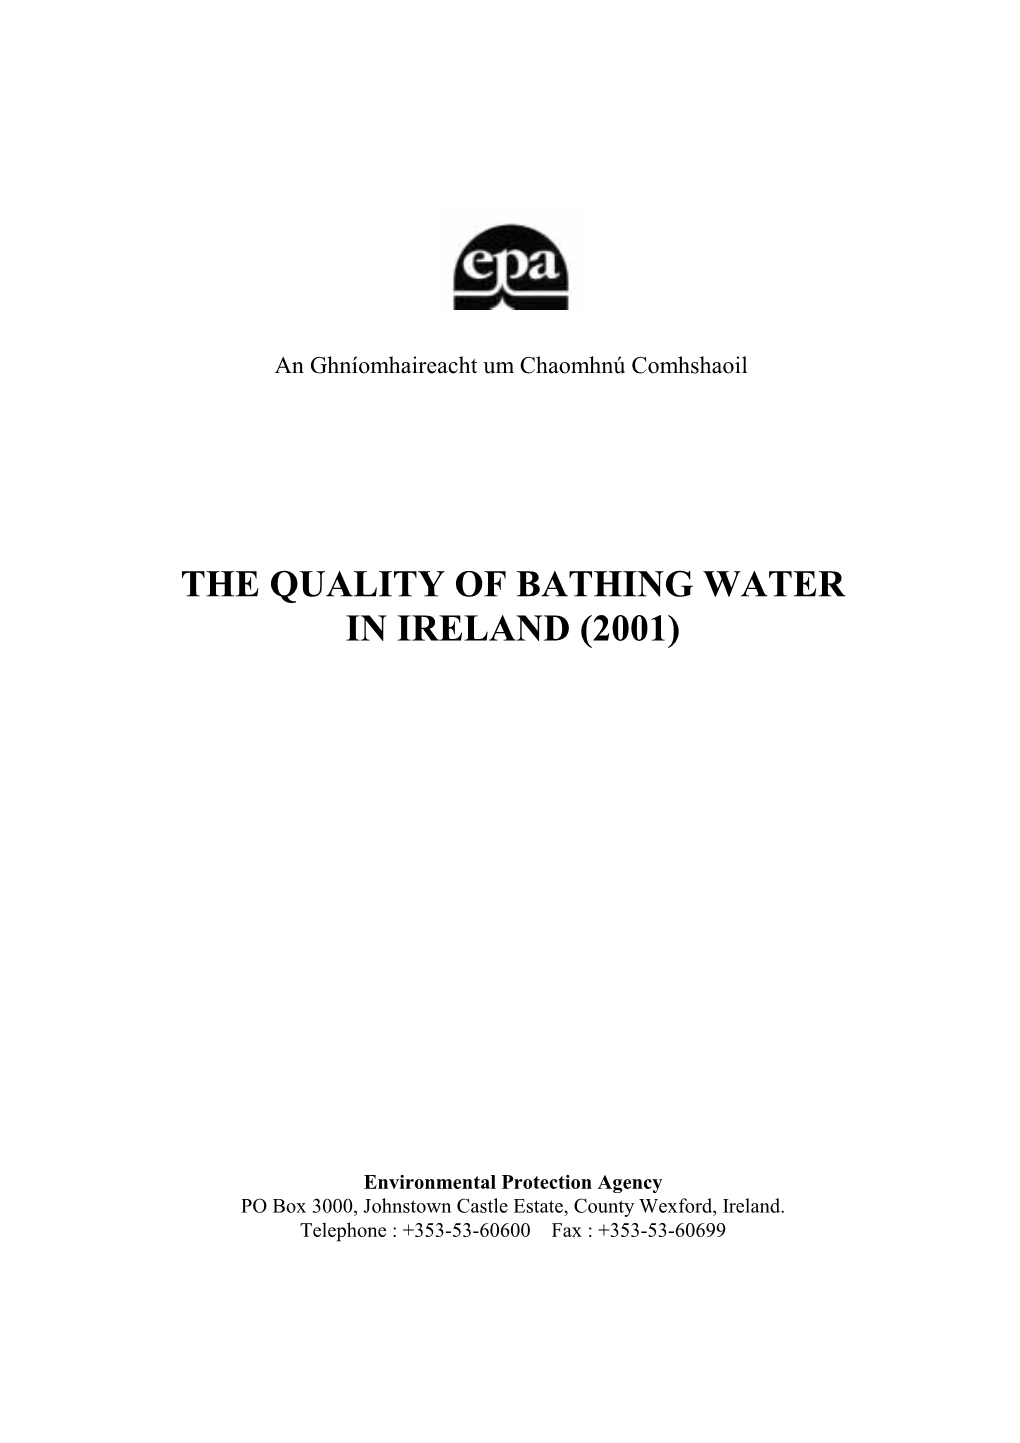 The Quality of Bathing Water in Ireland (2001)